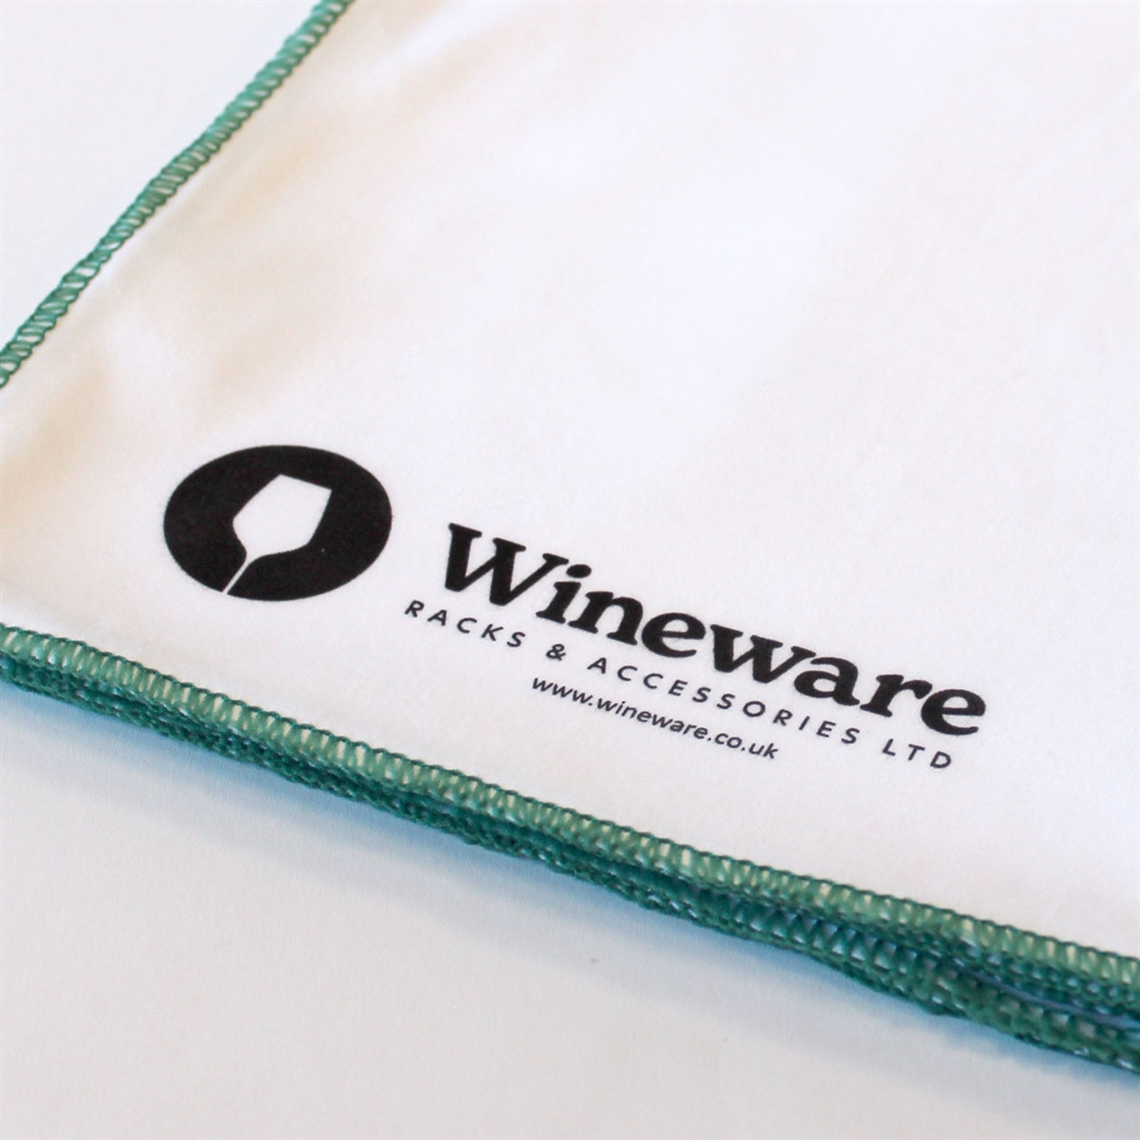 View more wine & spirit measures from our Wine Decanter Cleaning range